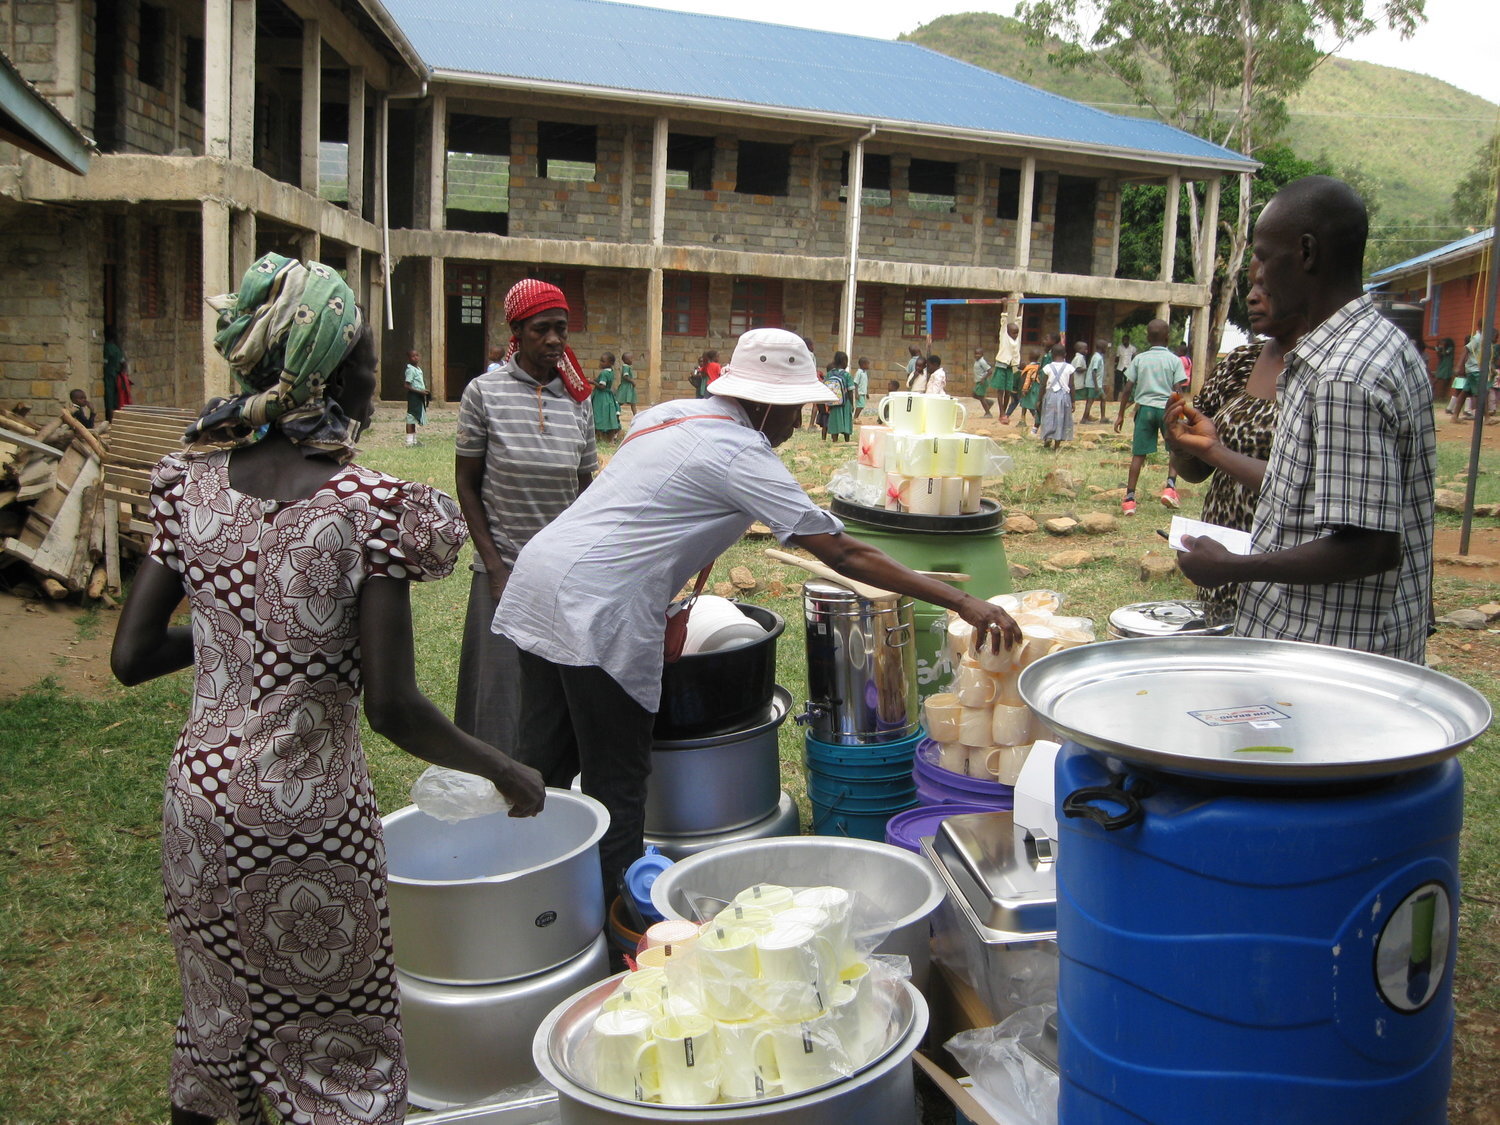 There are many children in the school yard background and five  village persons who are catering an event.  They are seen setting up cups and beverages to be served.